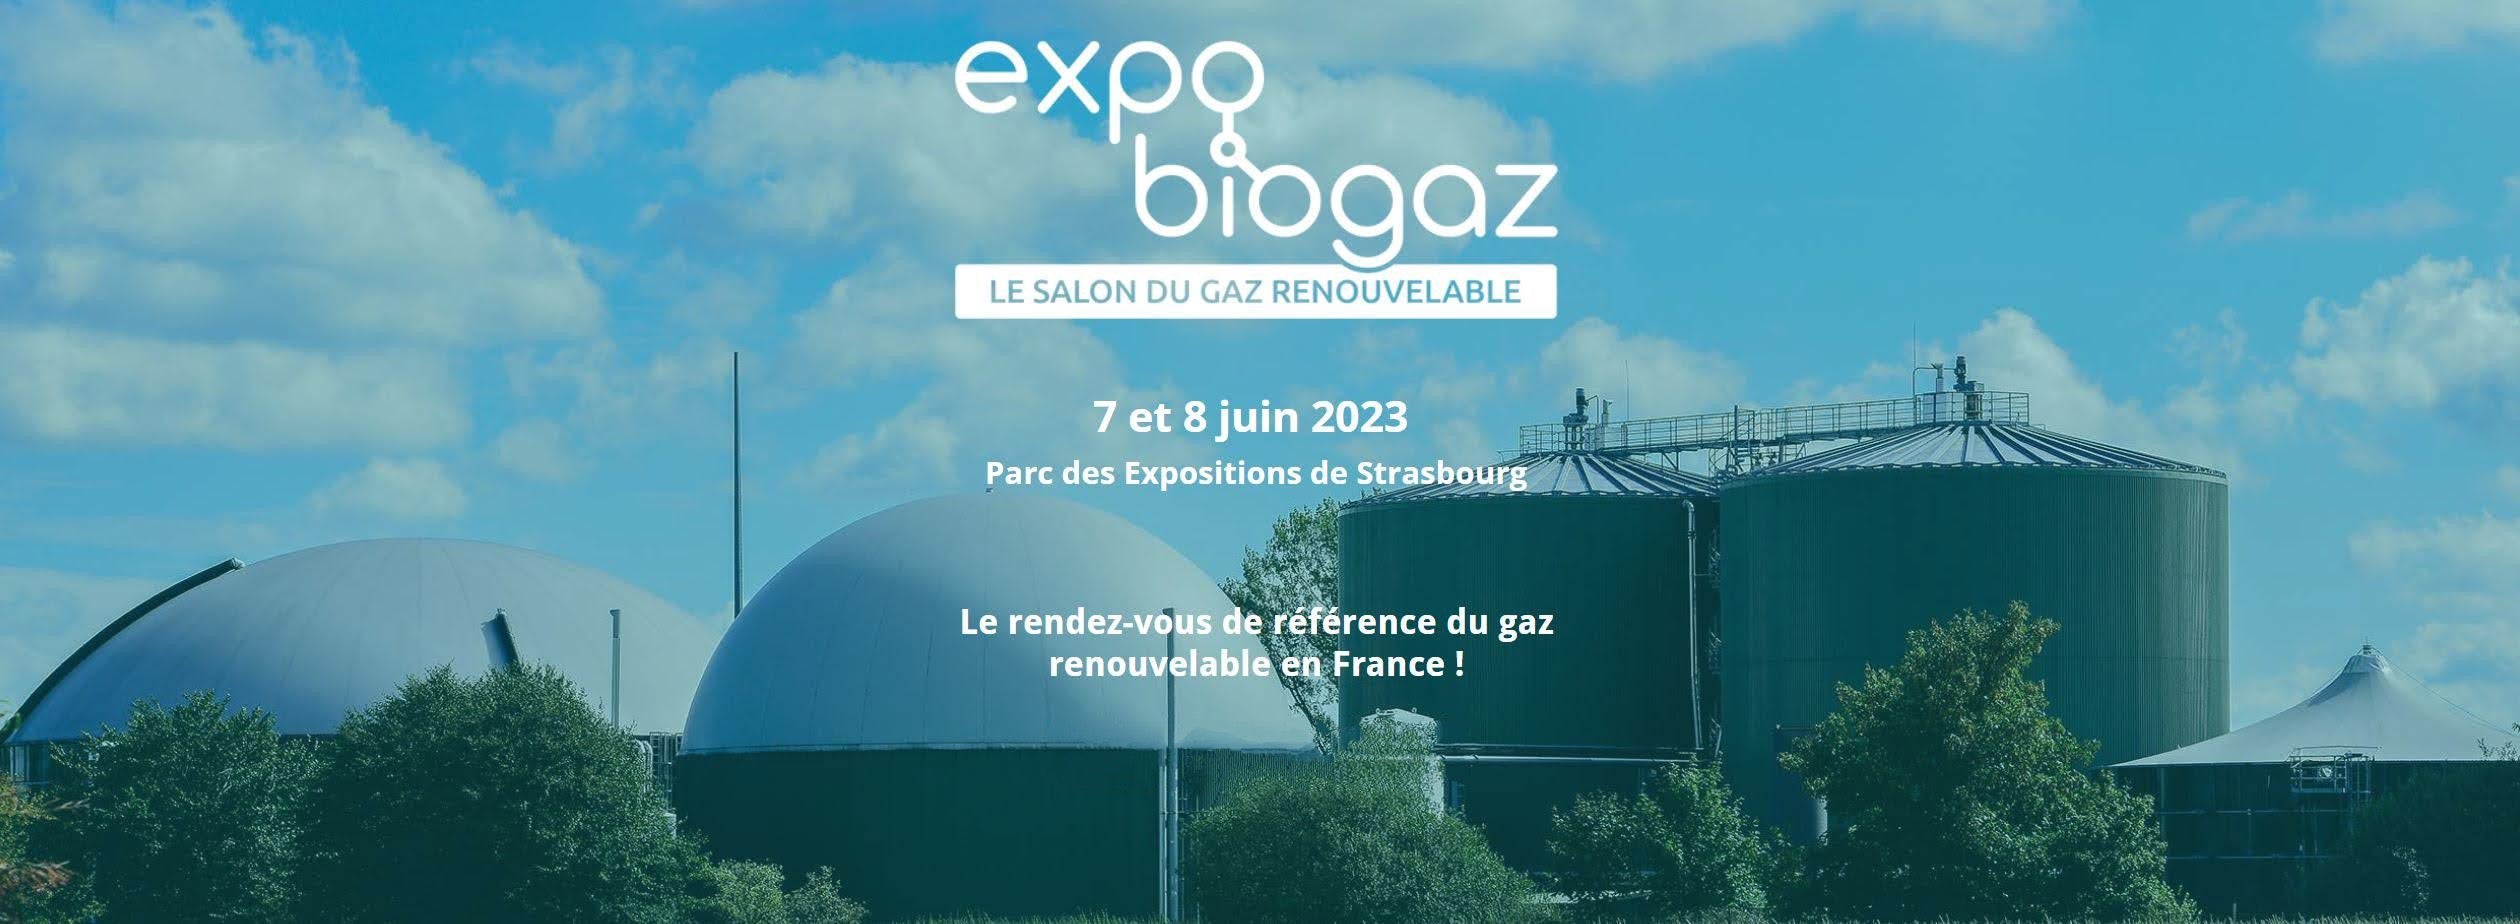 See you at the Expobiogaz exhibition in Strasbourg!